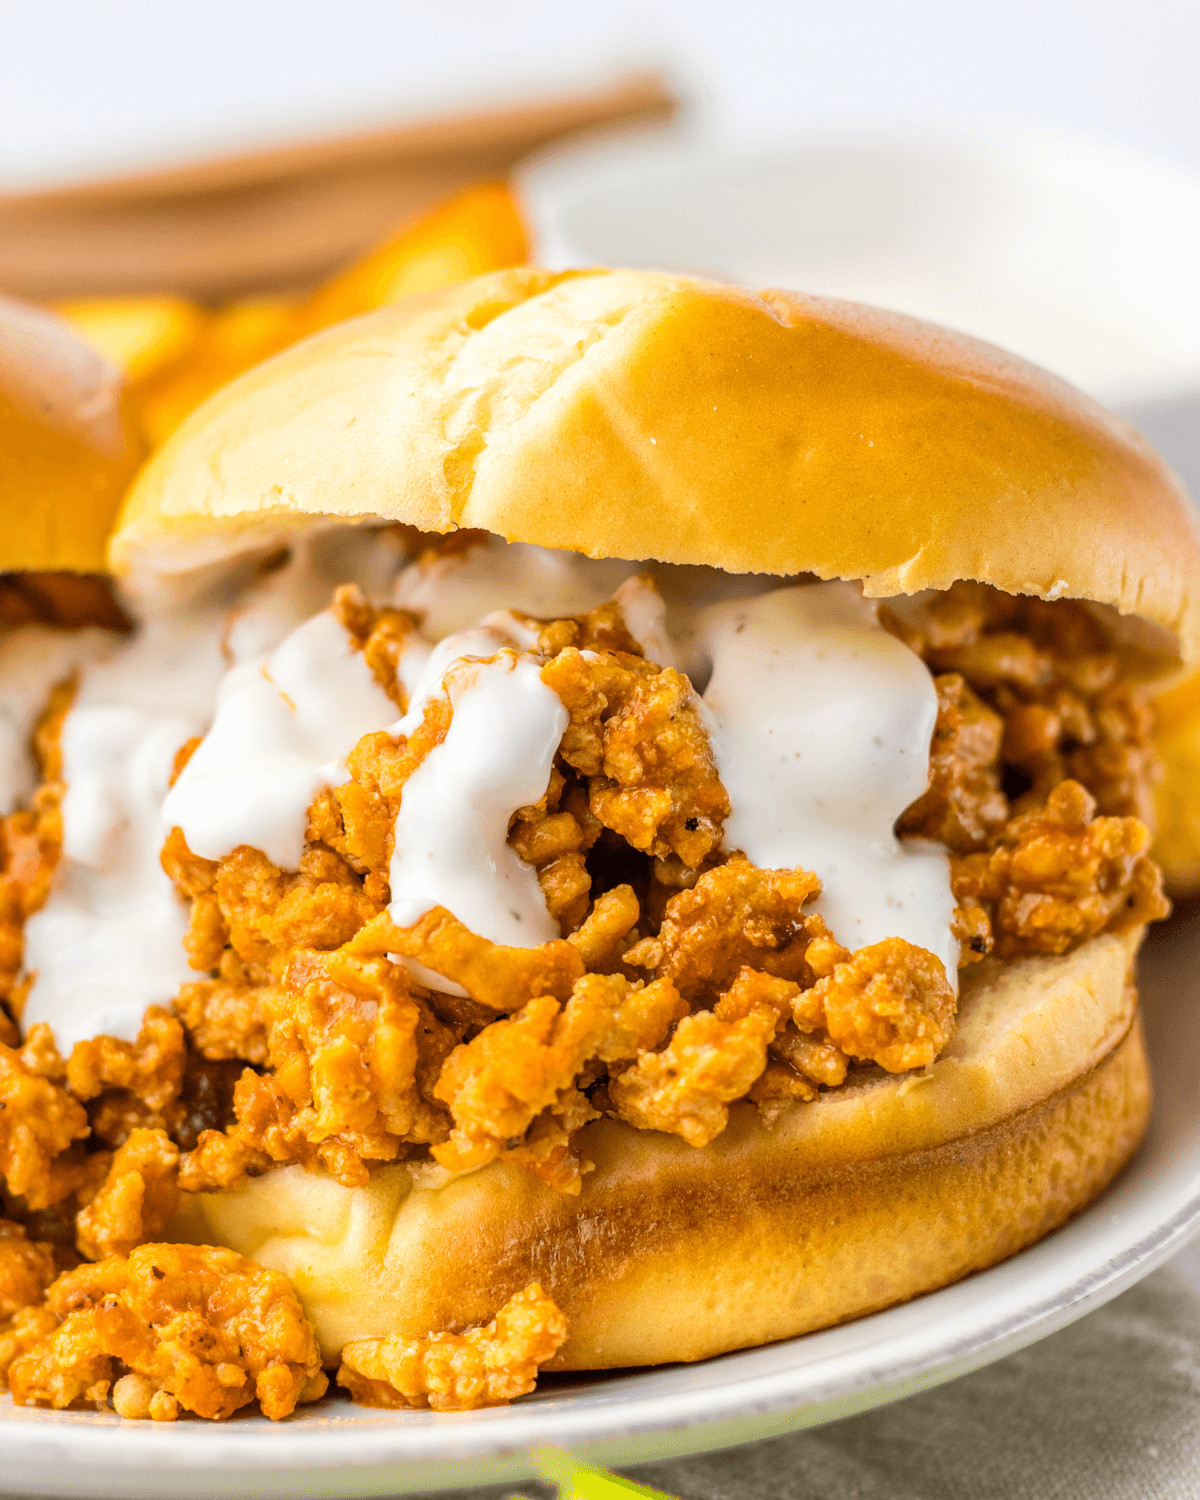 A buffalo chicken sloppy joe sandwich with ground meat and sauce on a bun, made in a slow cooker.